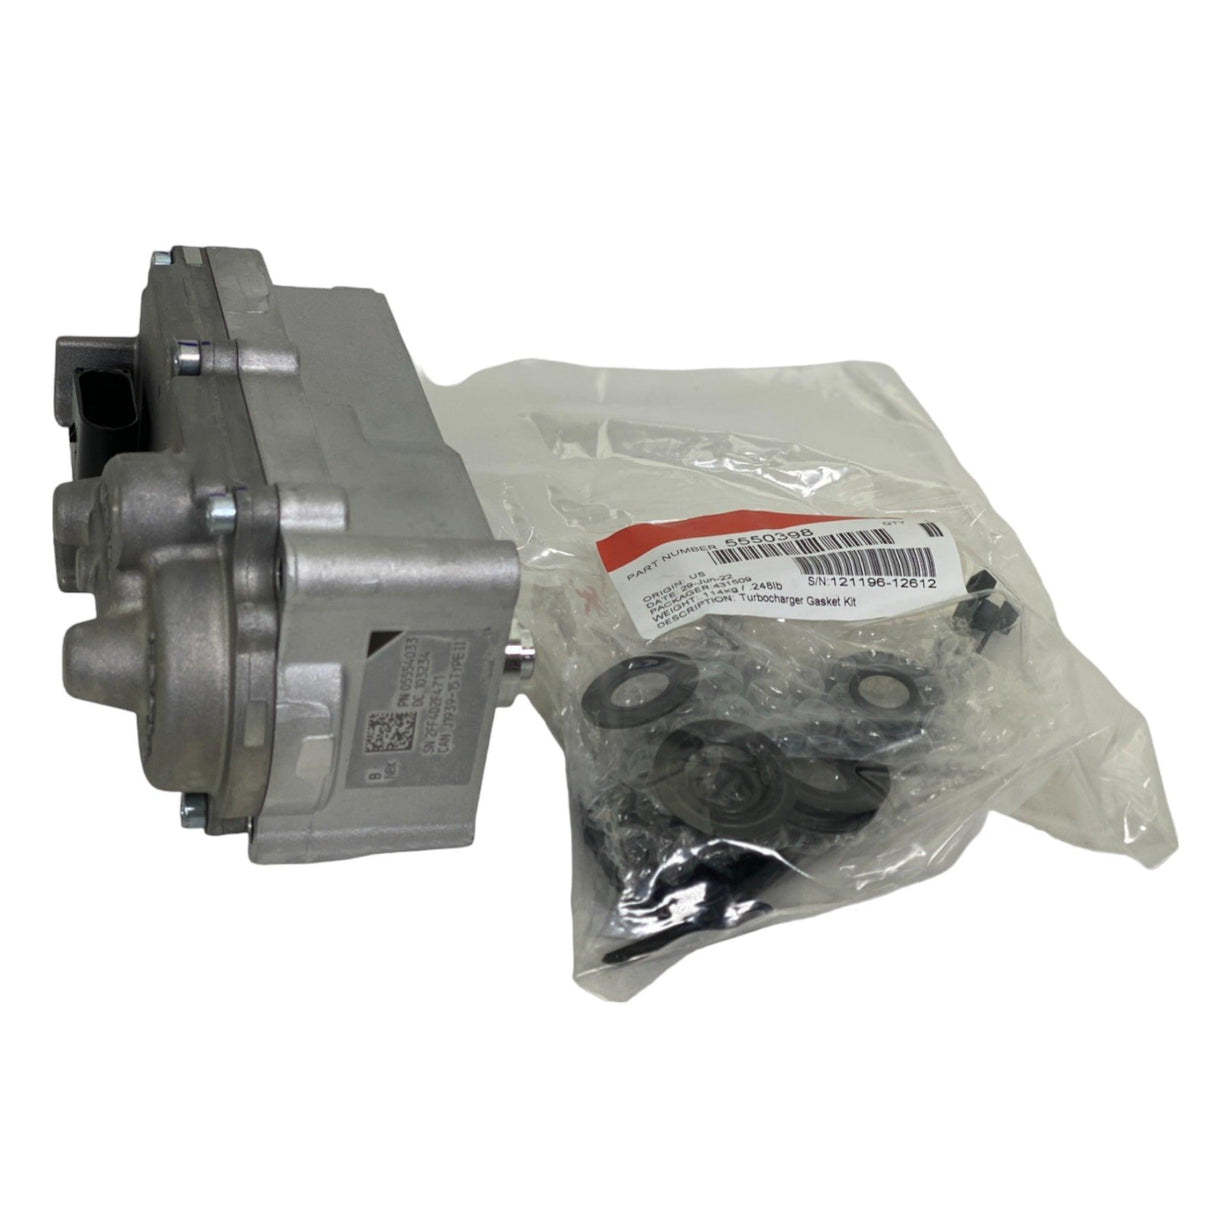 5603776Rx  Genuine Cummins Turbo Electronic Actuator For Isc.